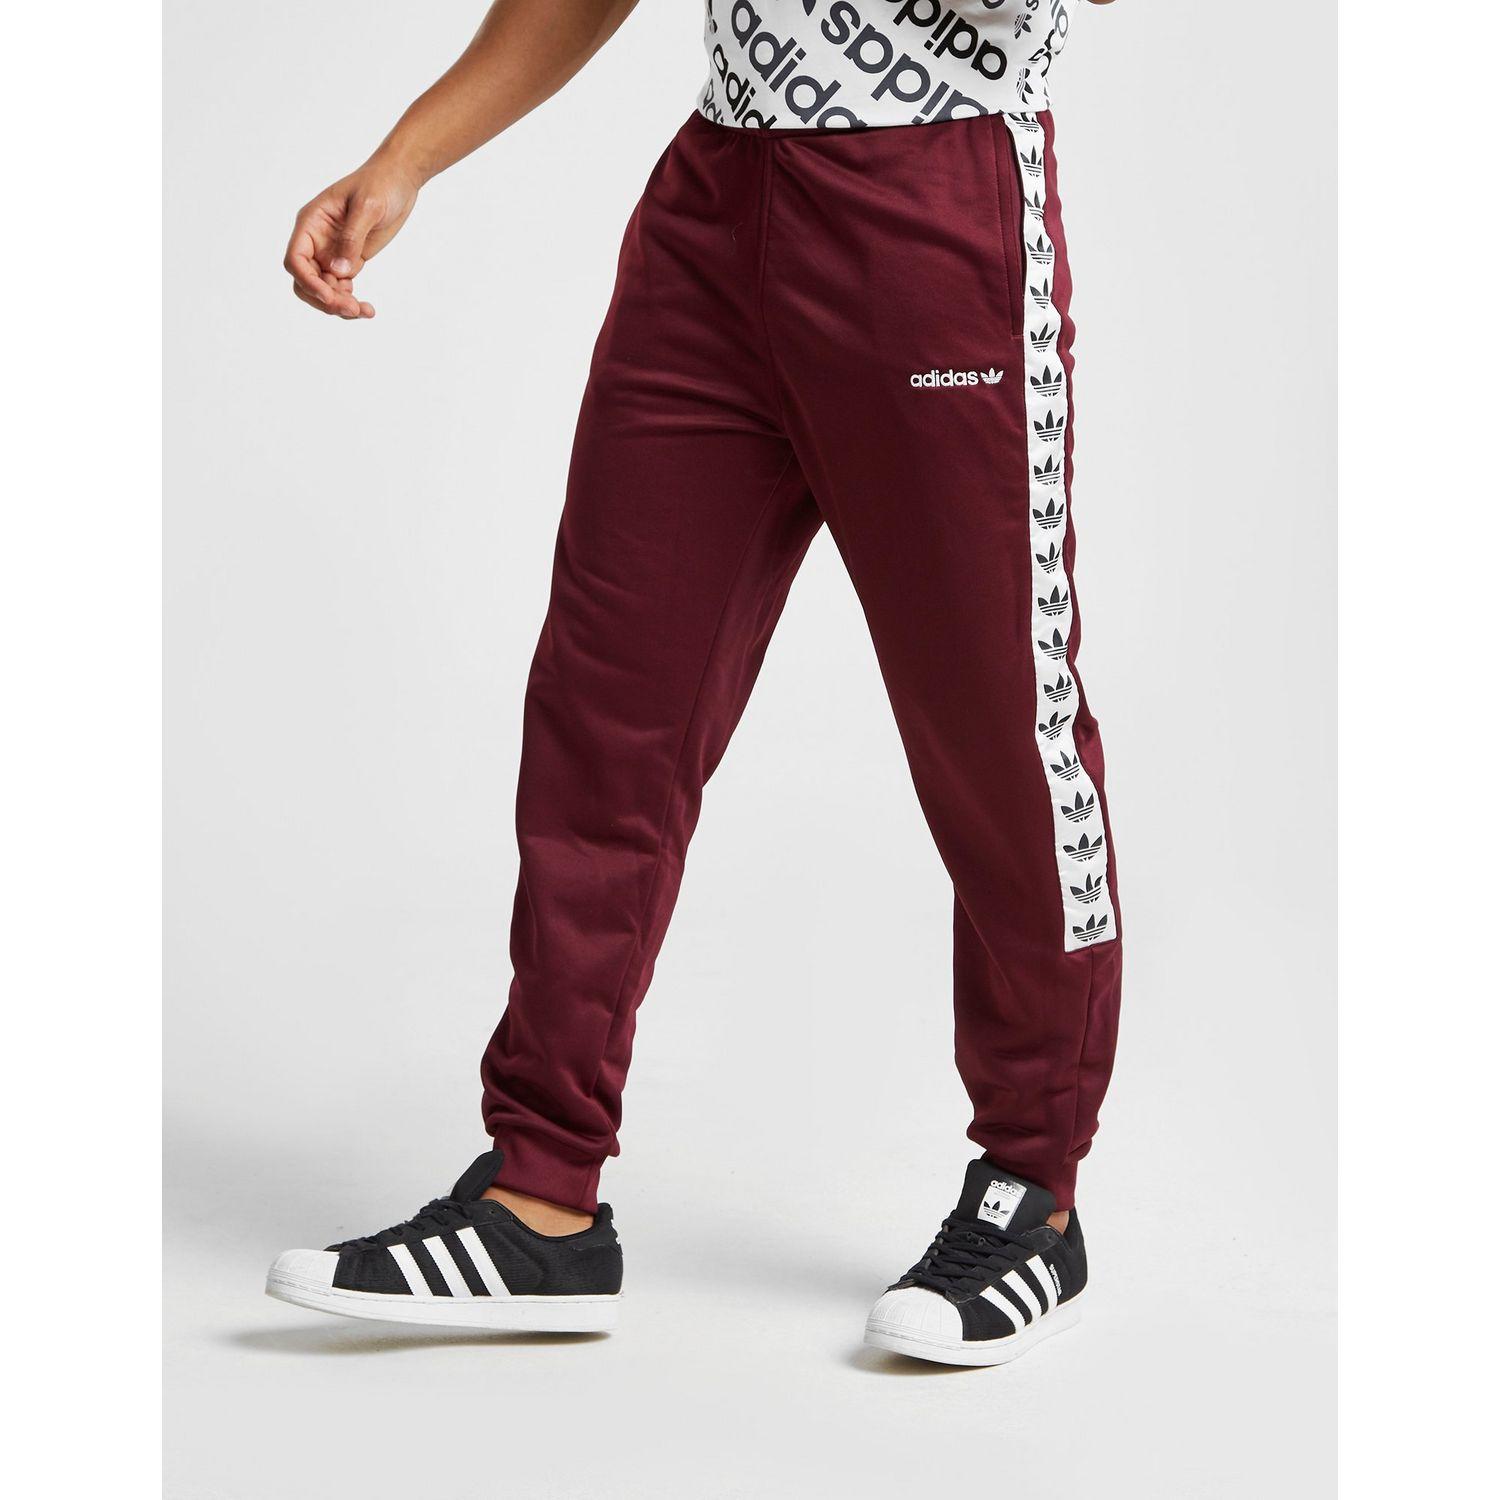 Adidas Poly Track Pants Deals - playgrowned.com 1690180769